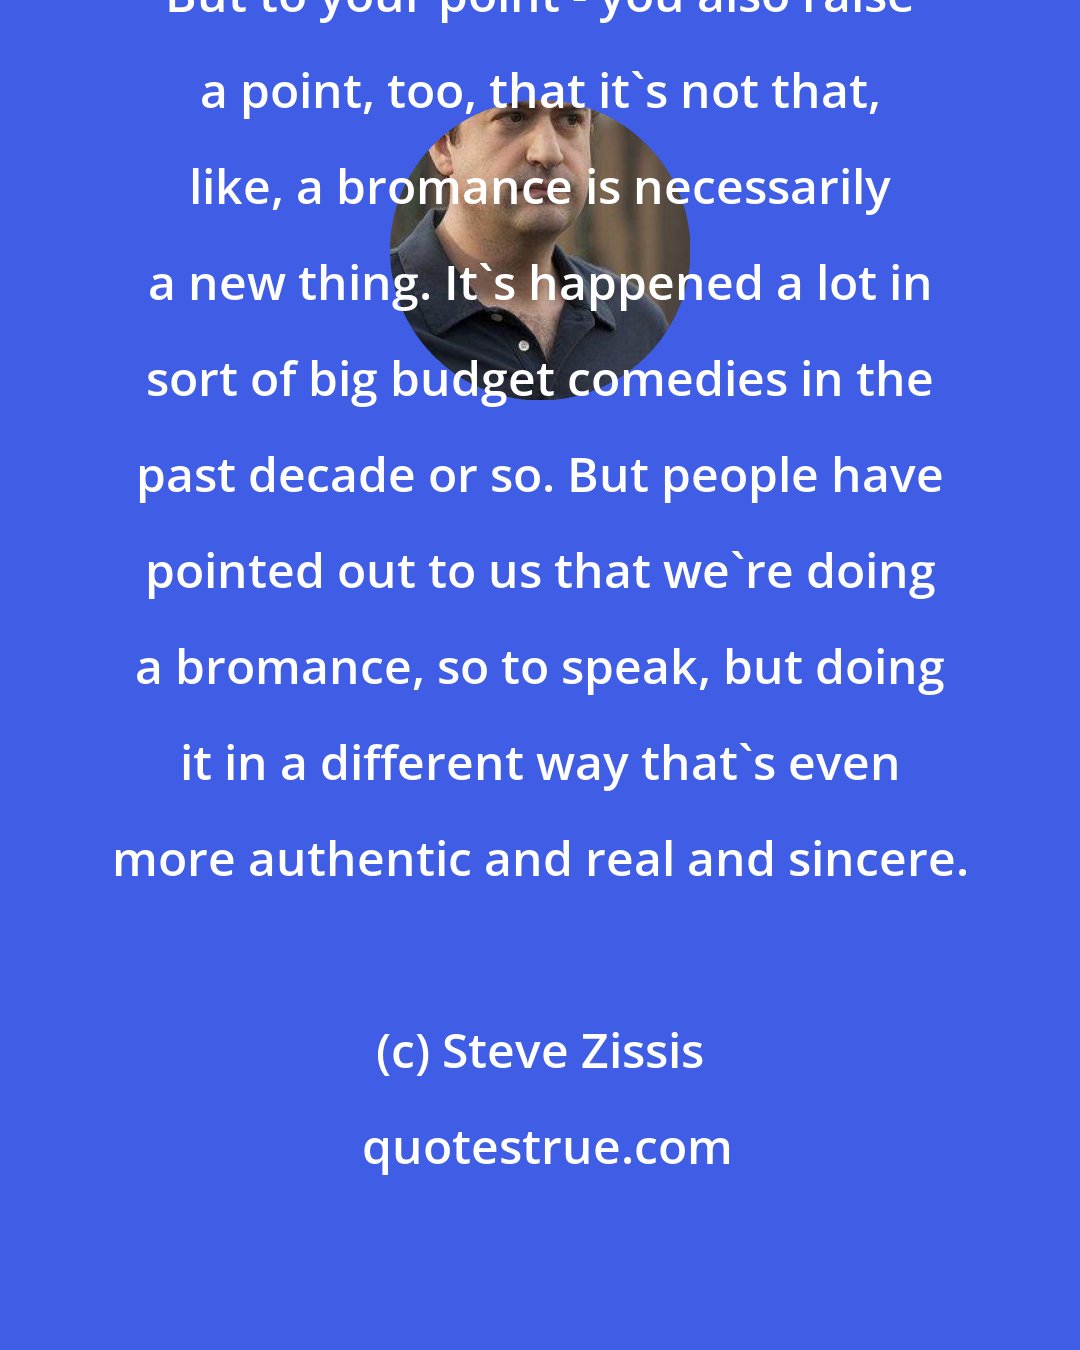 Steve Zissis: But to your point - you also raise a point, too, that it's not that, like, a bromance is necessarily a new thing. It's happened a lot in sort of big budget comedies in the past decade or so. But people have pointed out to us that we're doing a bromance, so to speak, but doing it in a different way that's even more authentic and real and sincere.